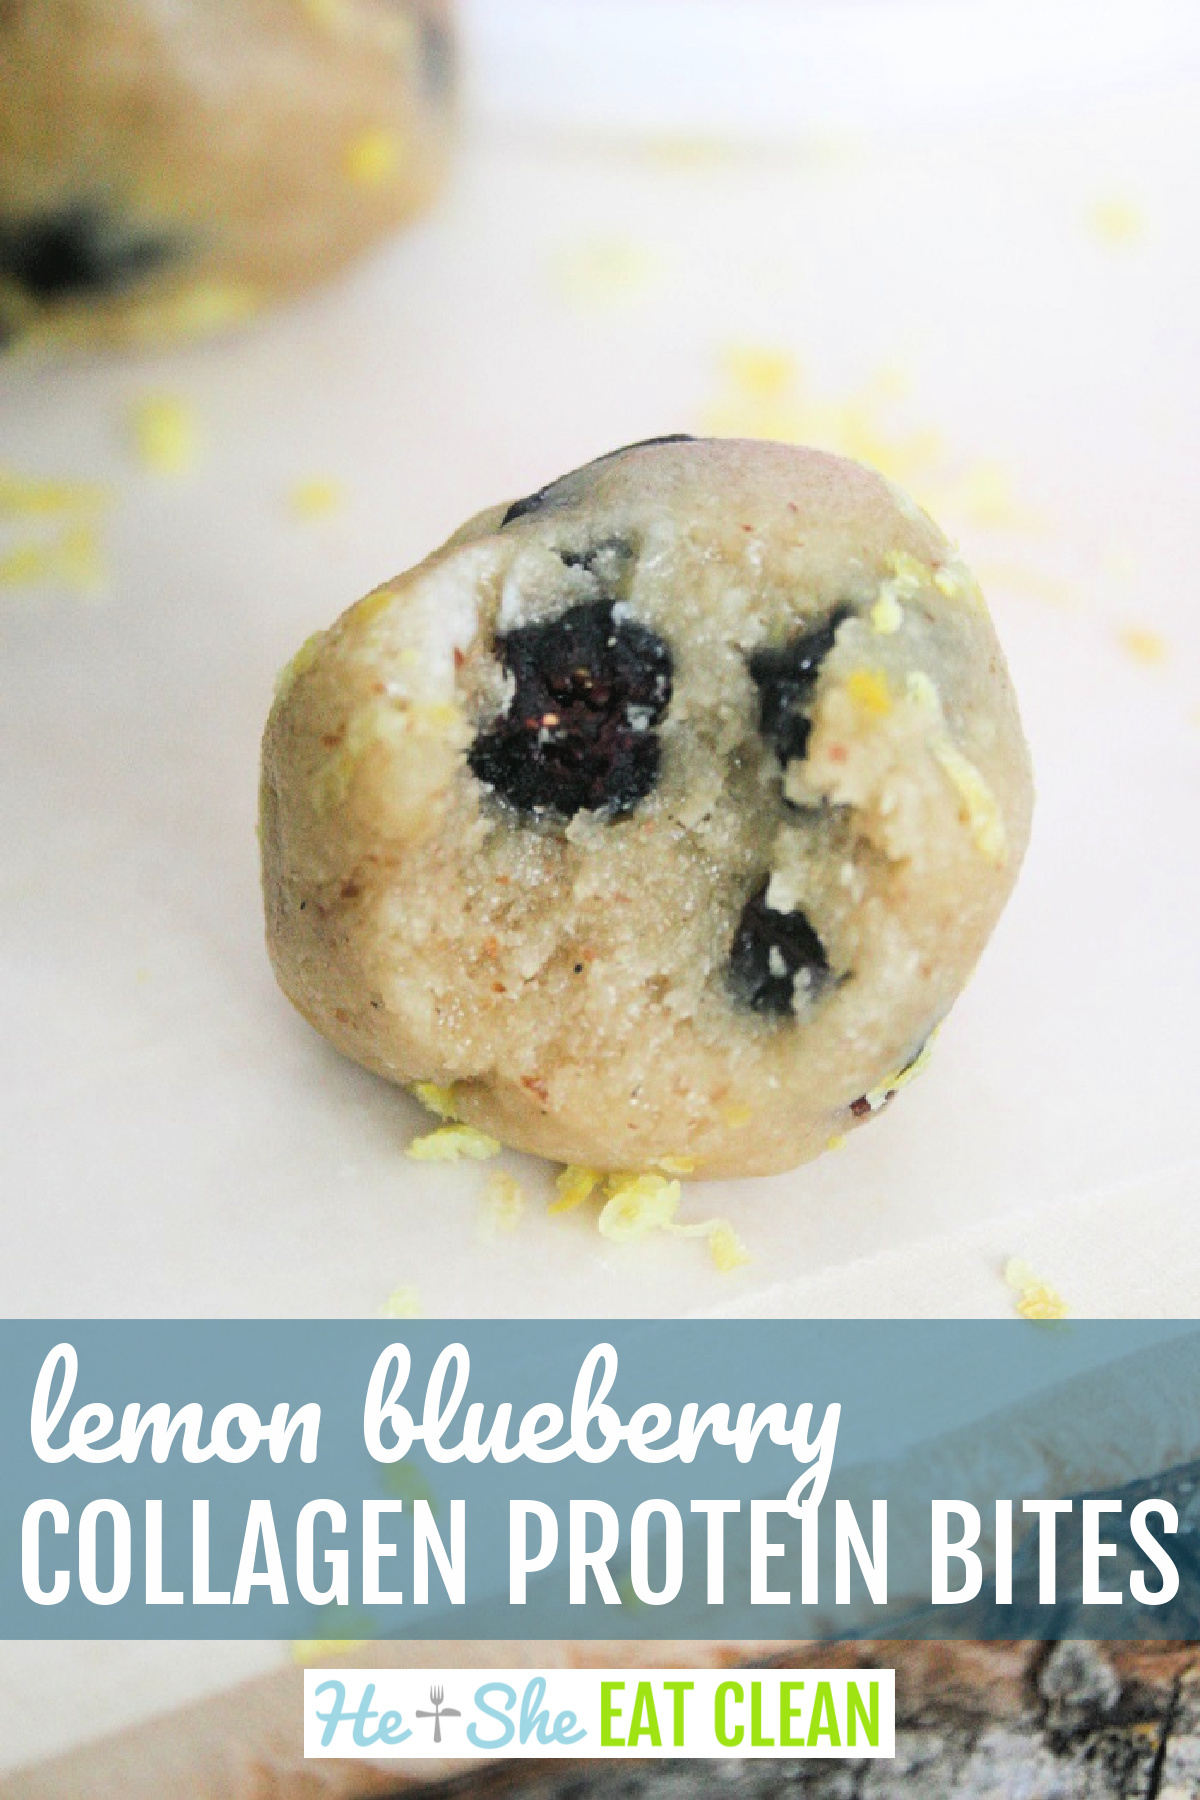 close up of protein bite/balls with blueberries inside and lemon zest around the bites